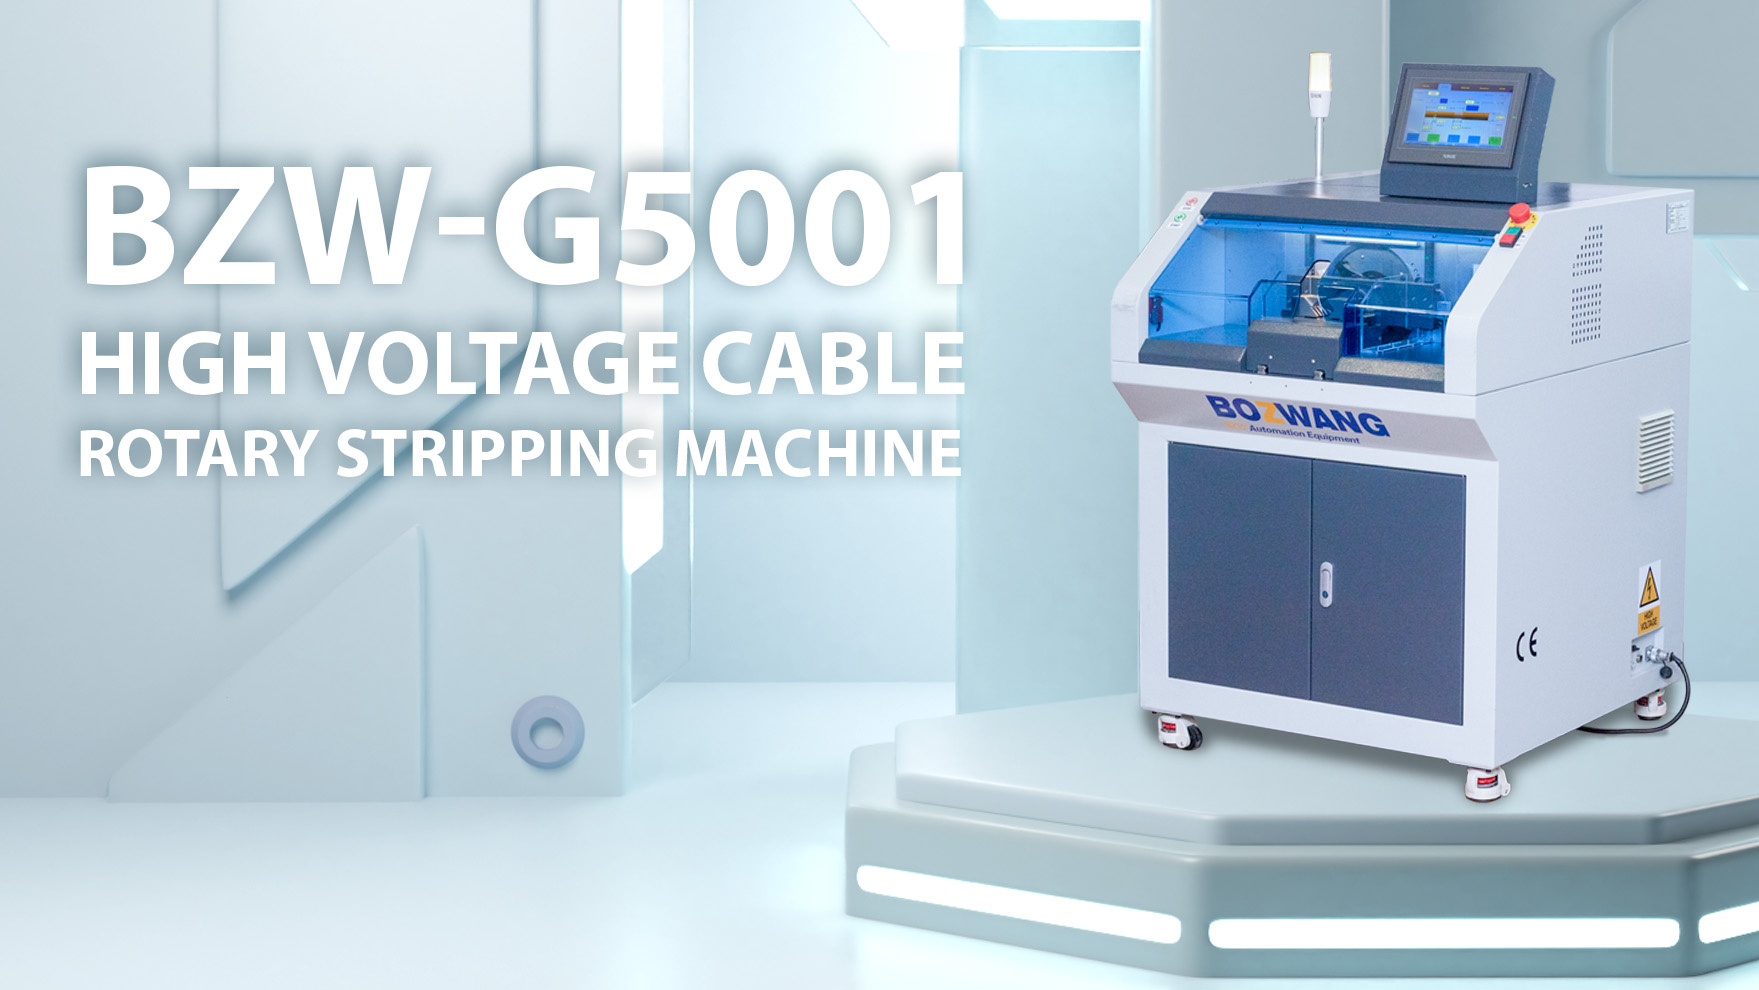 G5001
High Voltage Cable Intelligent Rotary Stripping Machine